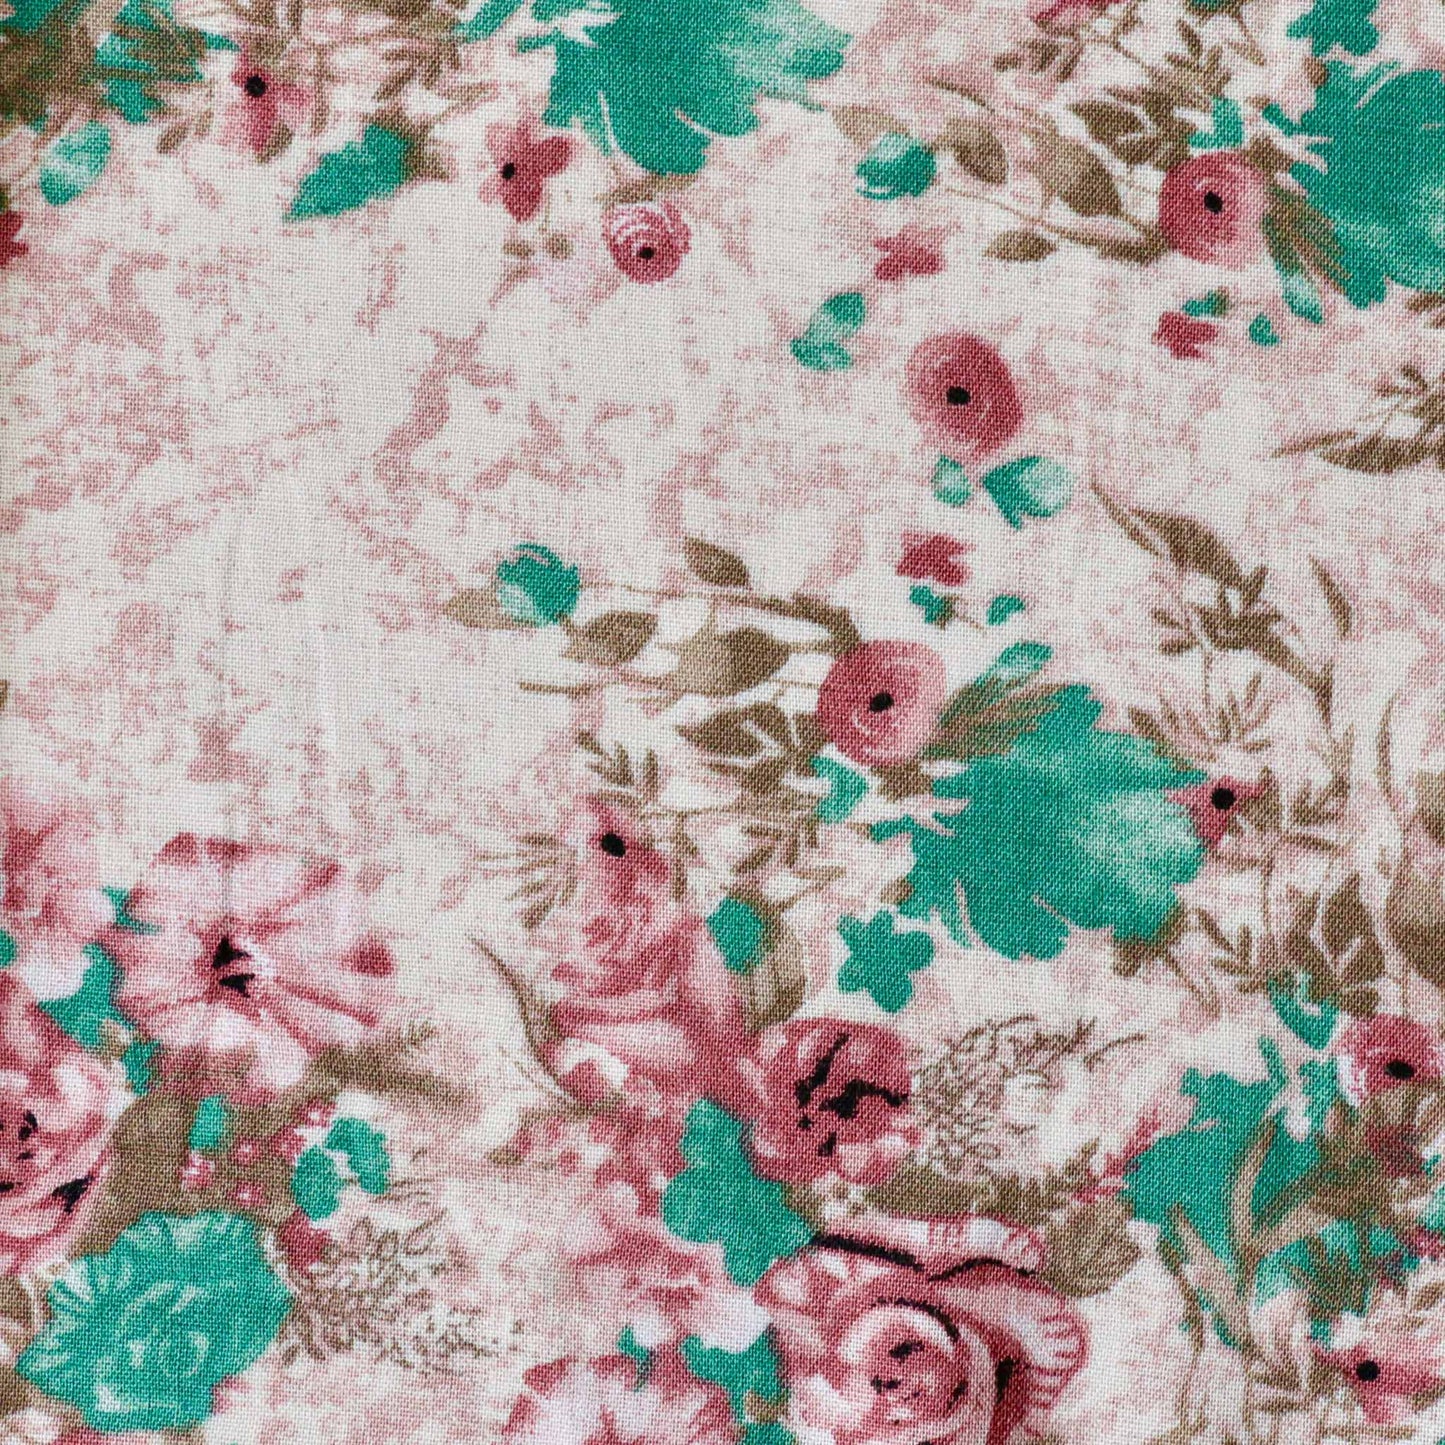 dusty pink viscose challis dressmaking fabric with turquoise classical floral print